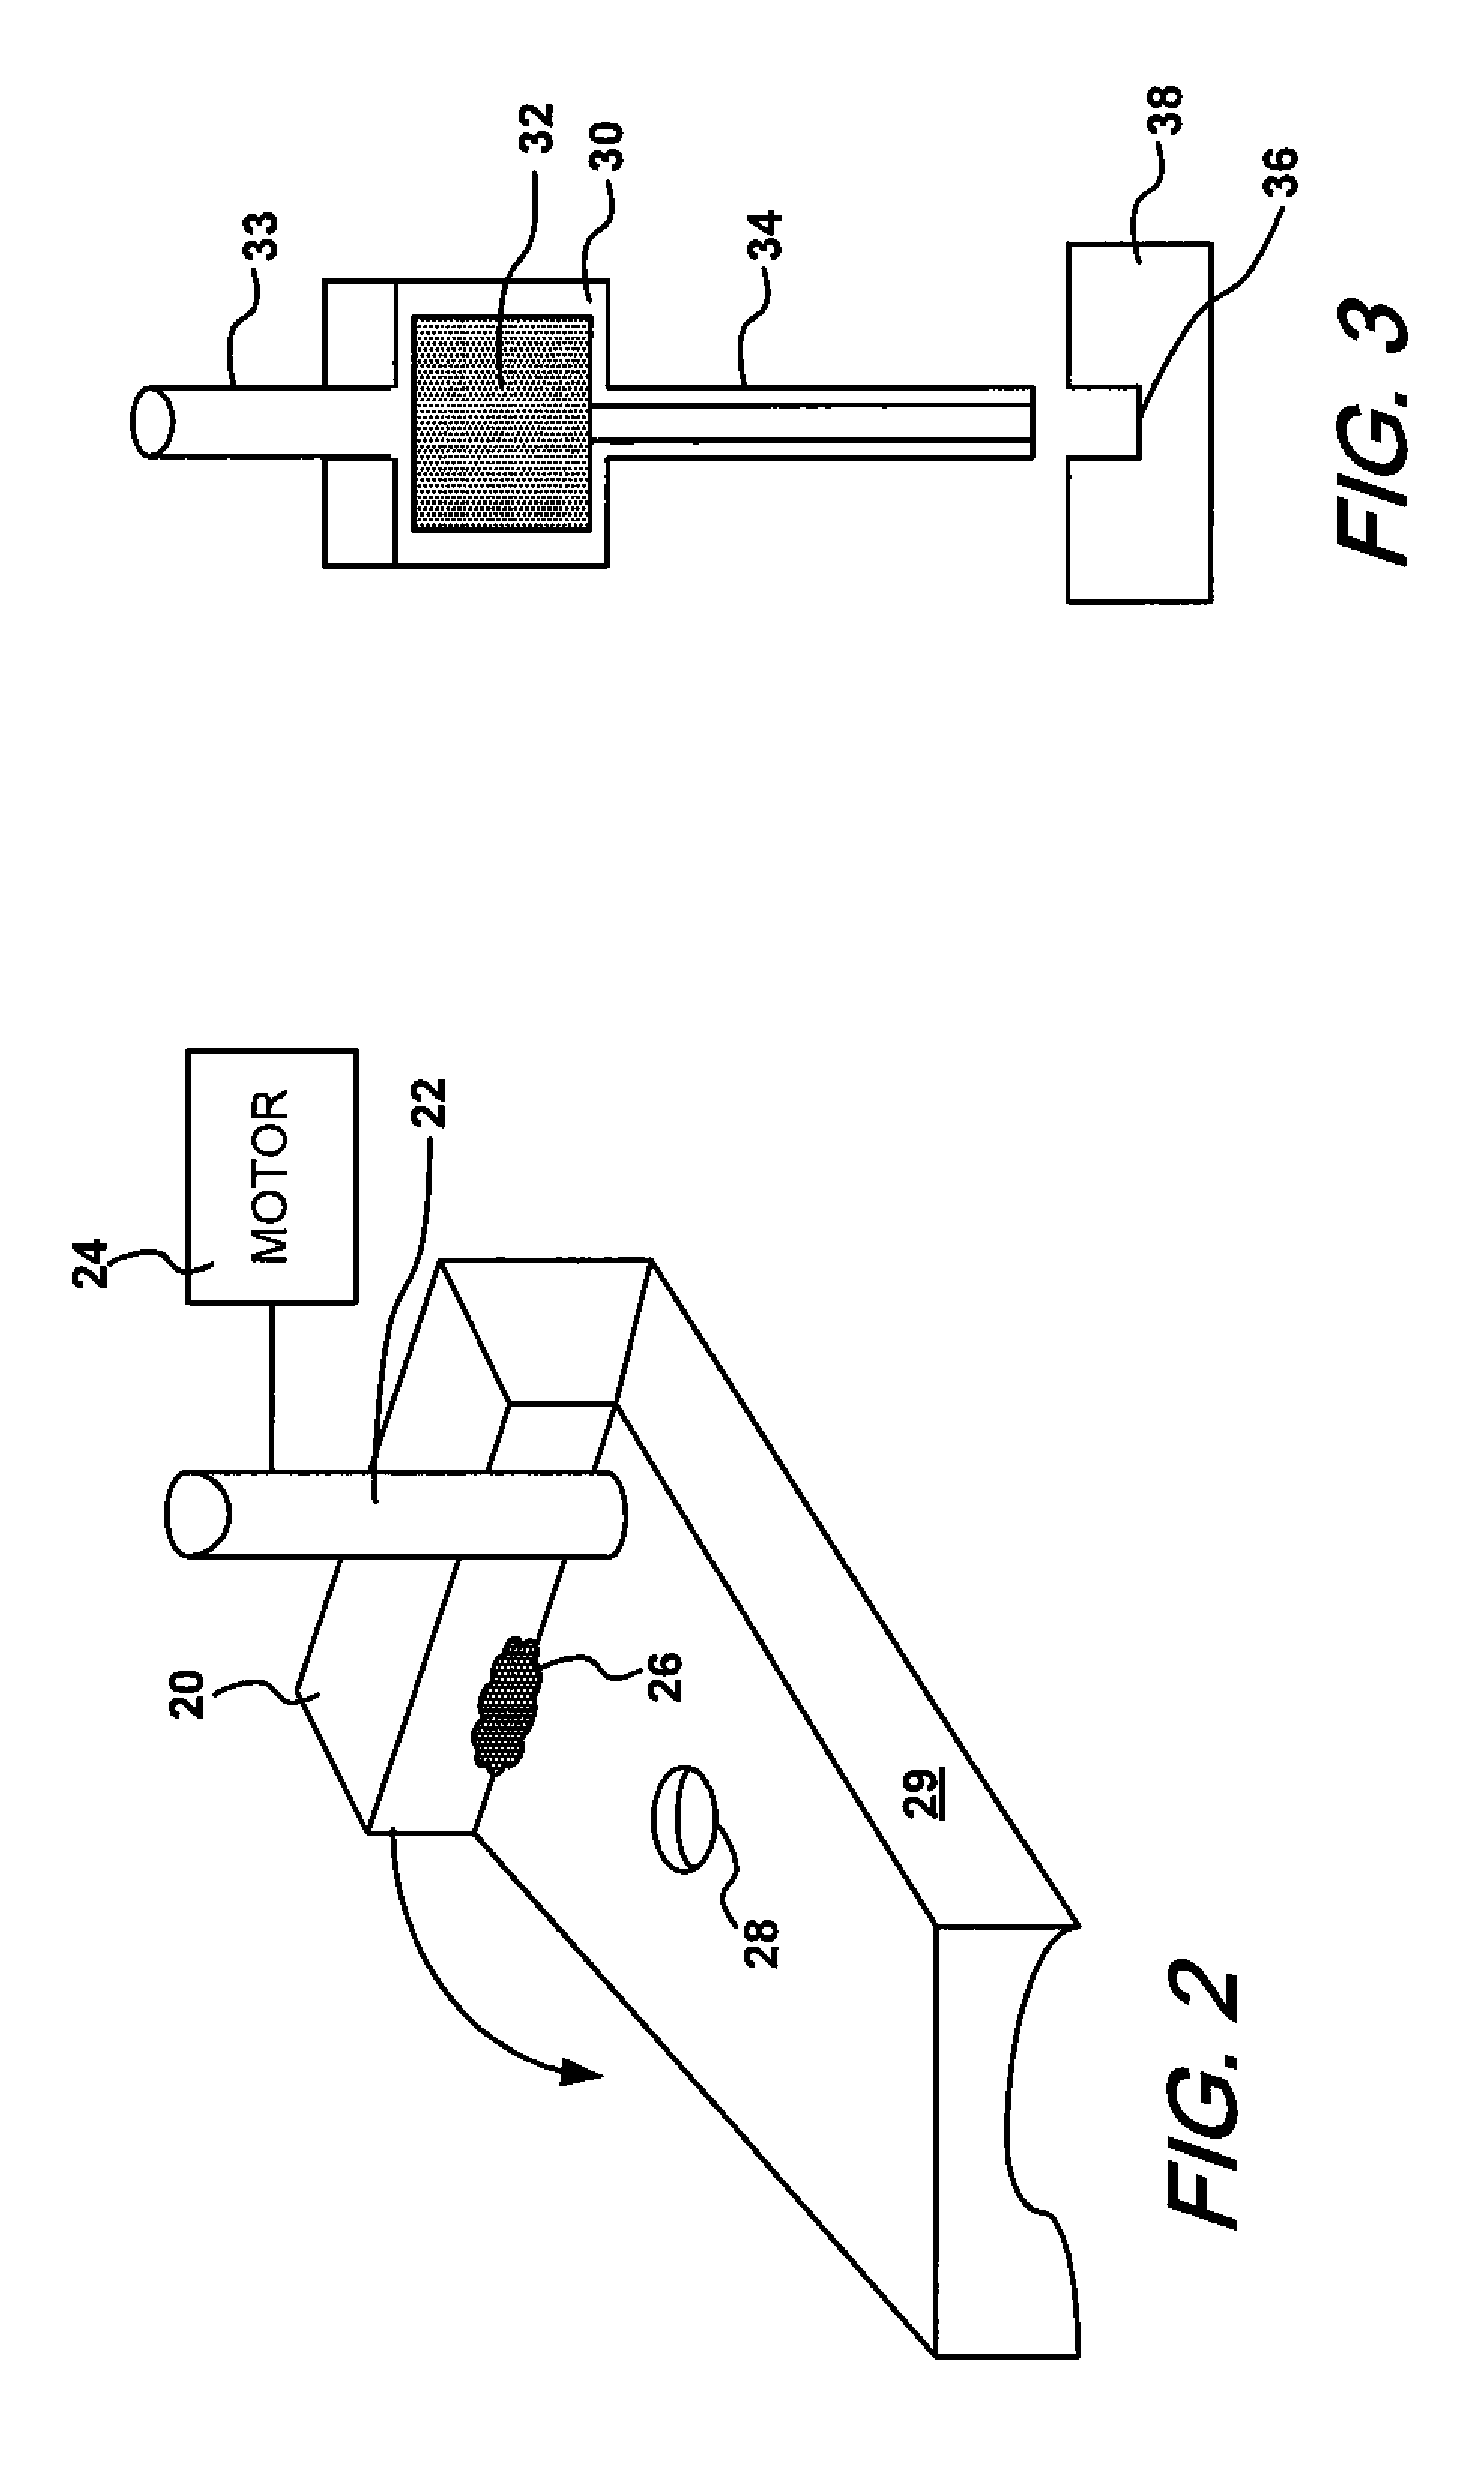 Methods for making and using high explosive fills for MEMS devices